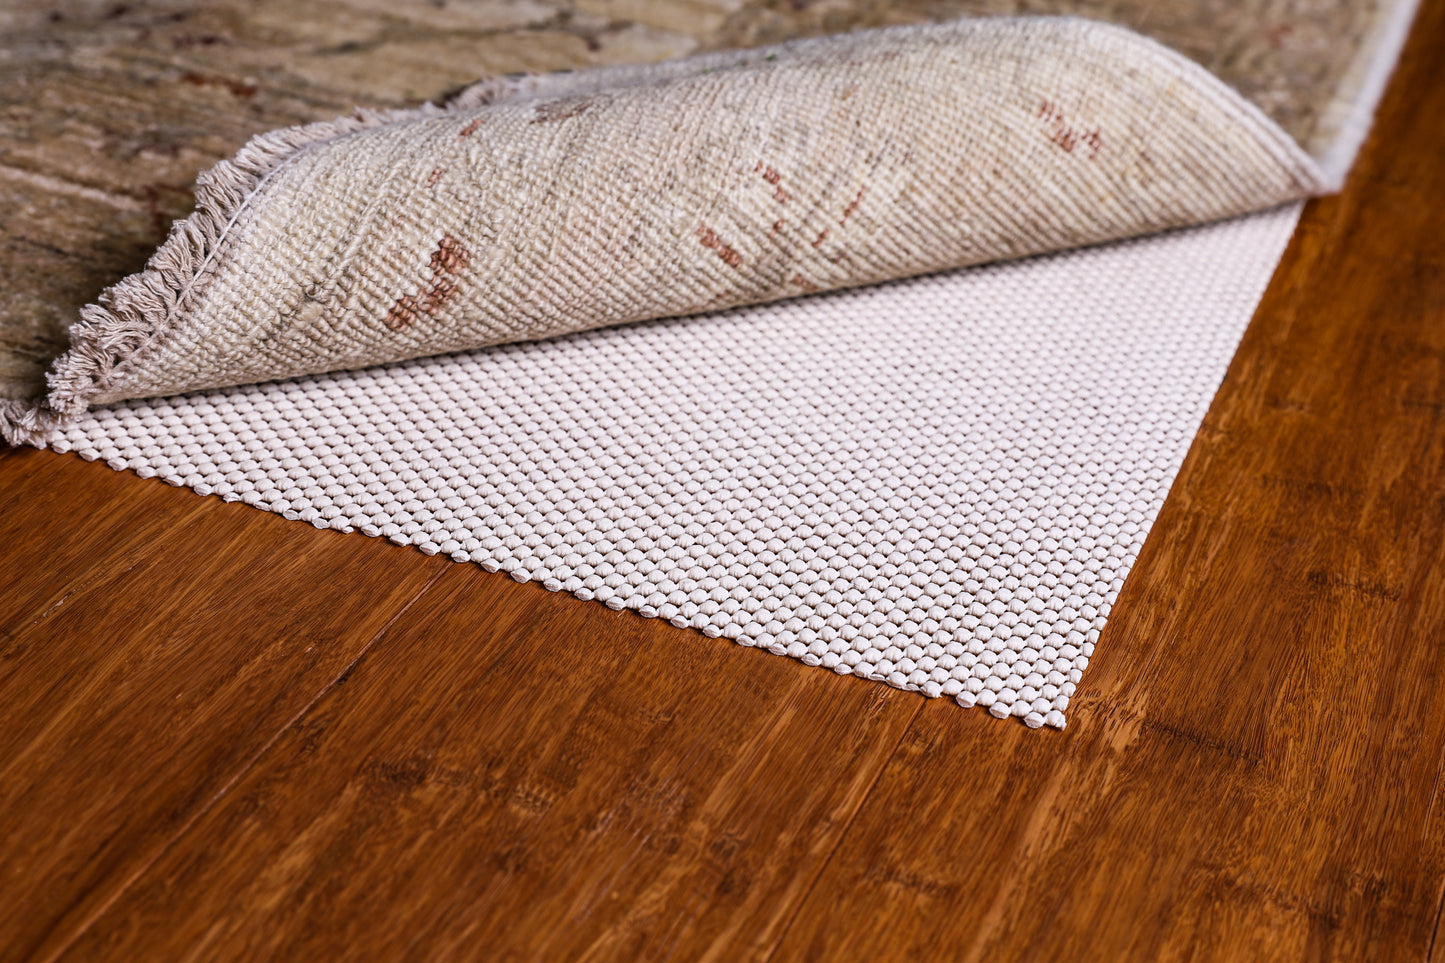 Super Grip Natural Non Slip Rug Pad by Slip-Stop - Taupe - 5' x 8